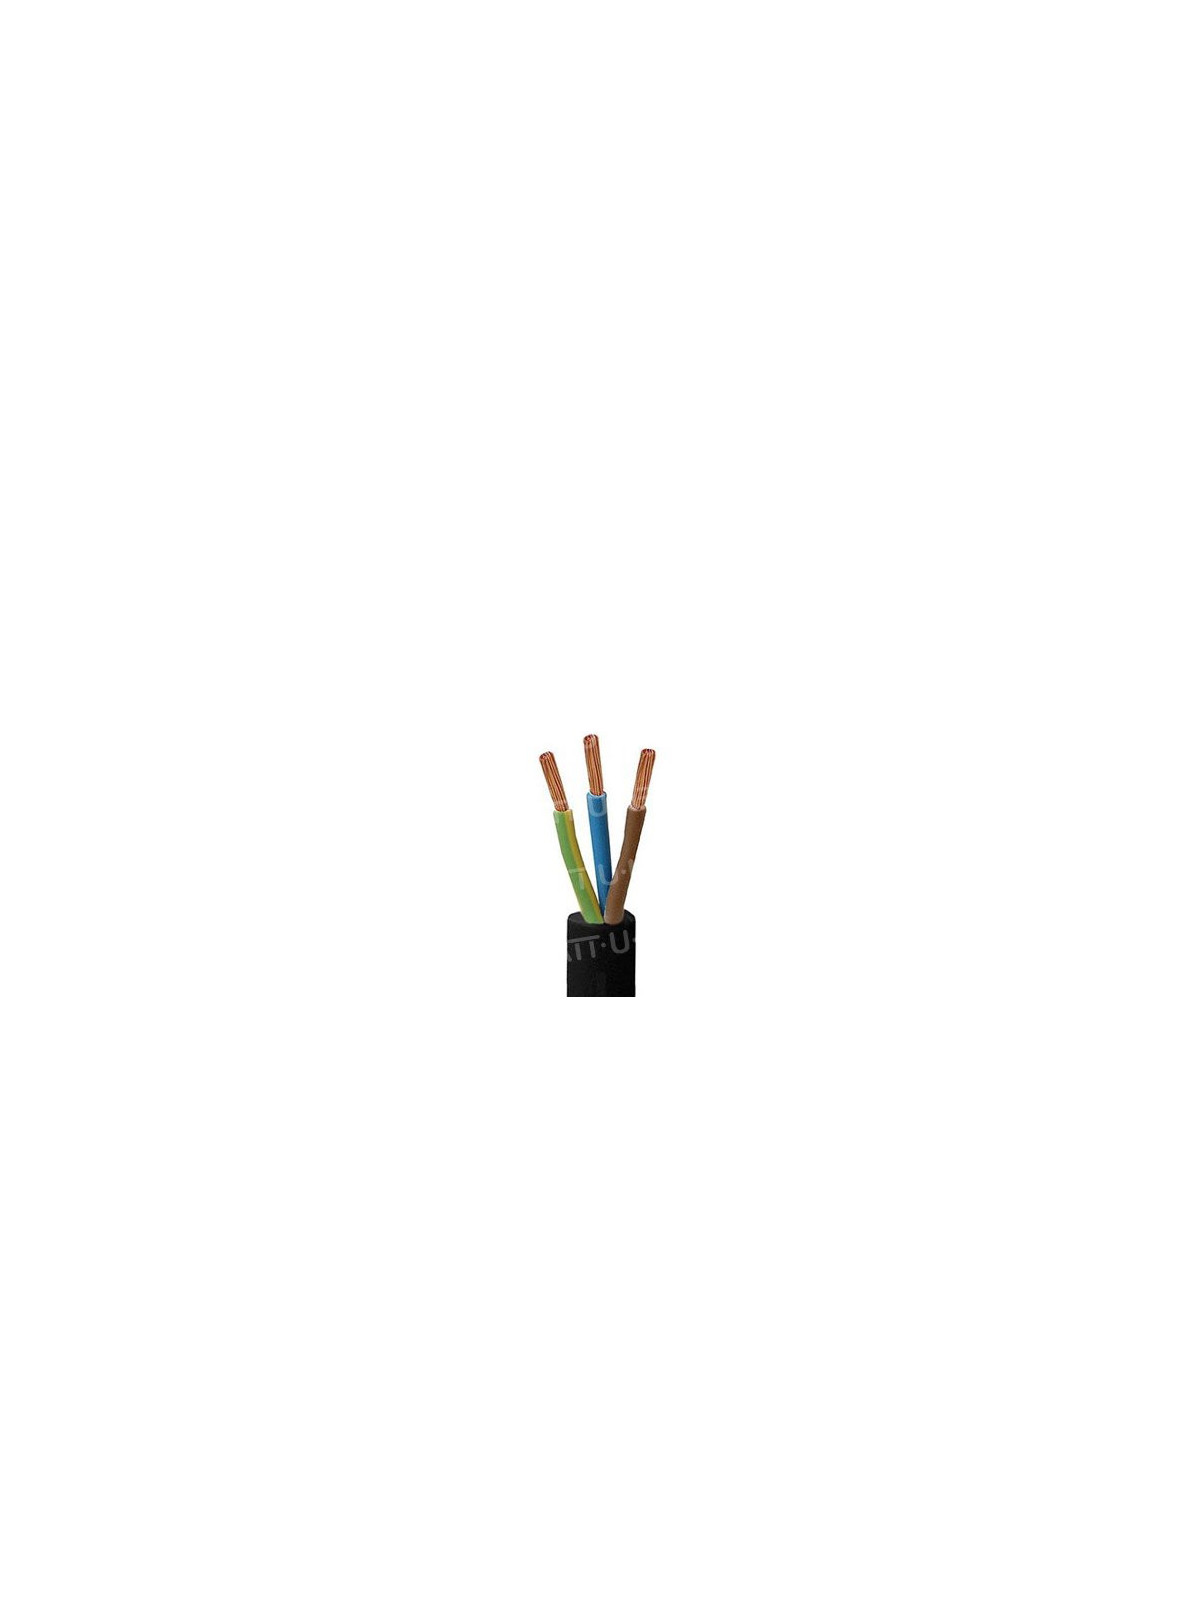 H05RR-F 3G 2,75mm² - 1m supple cable